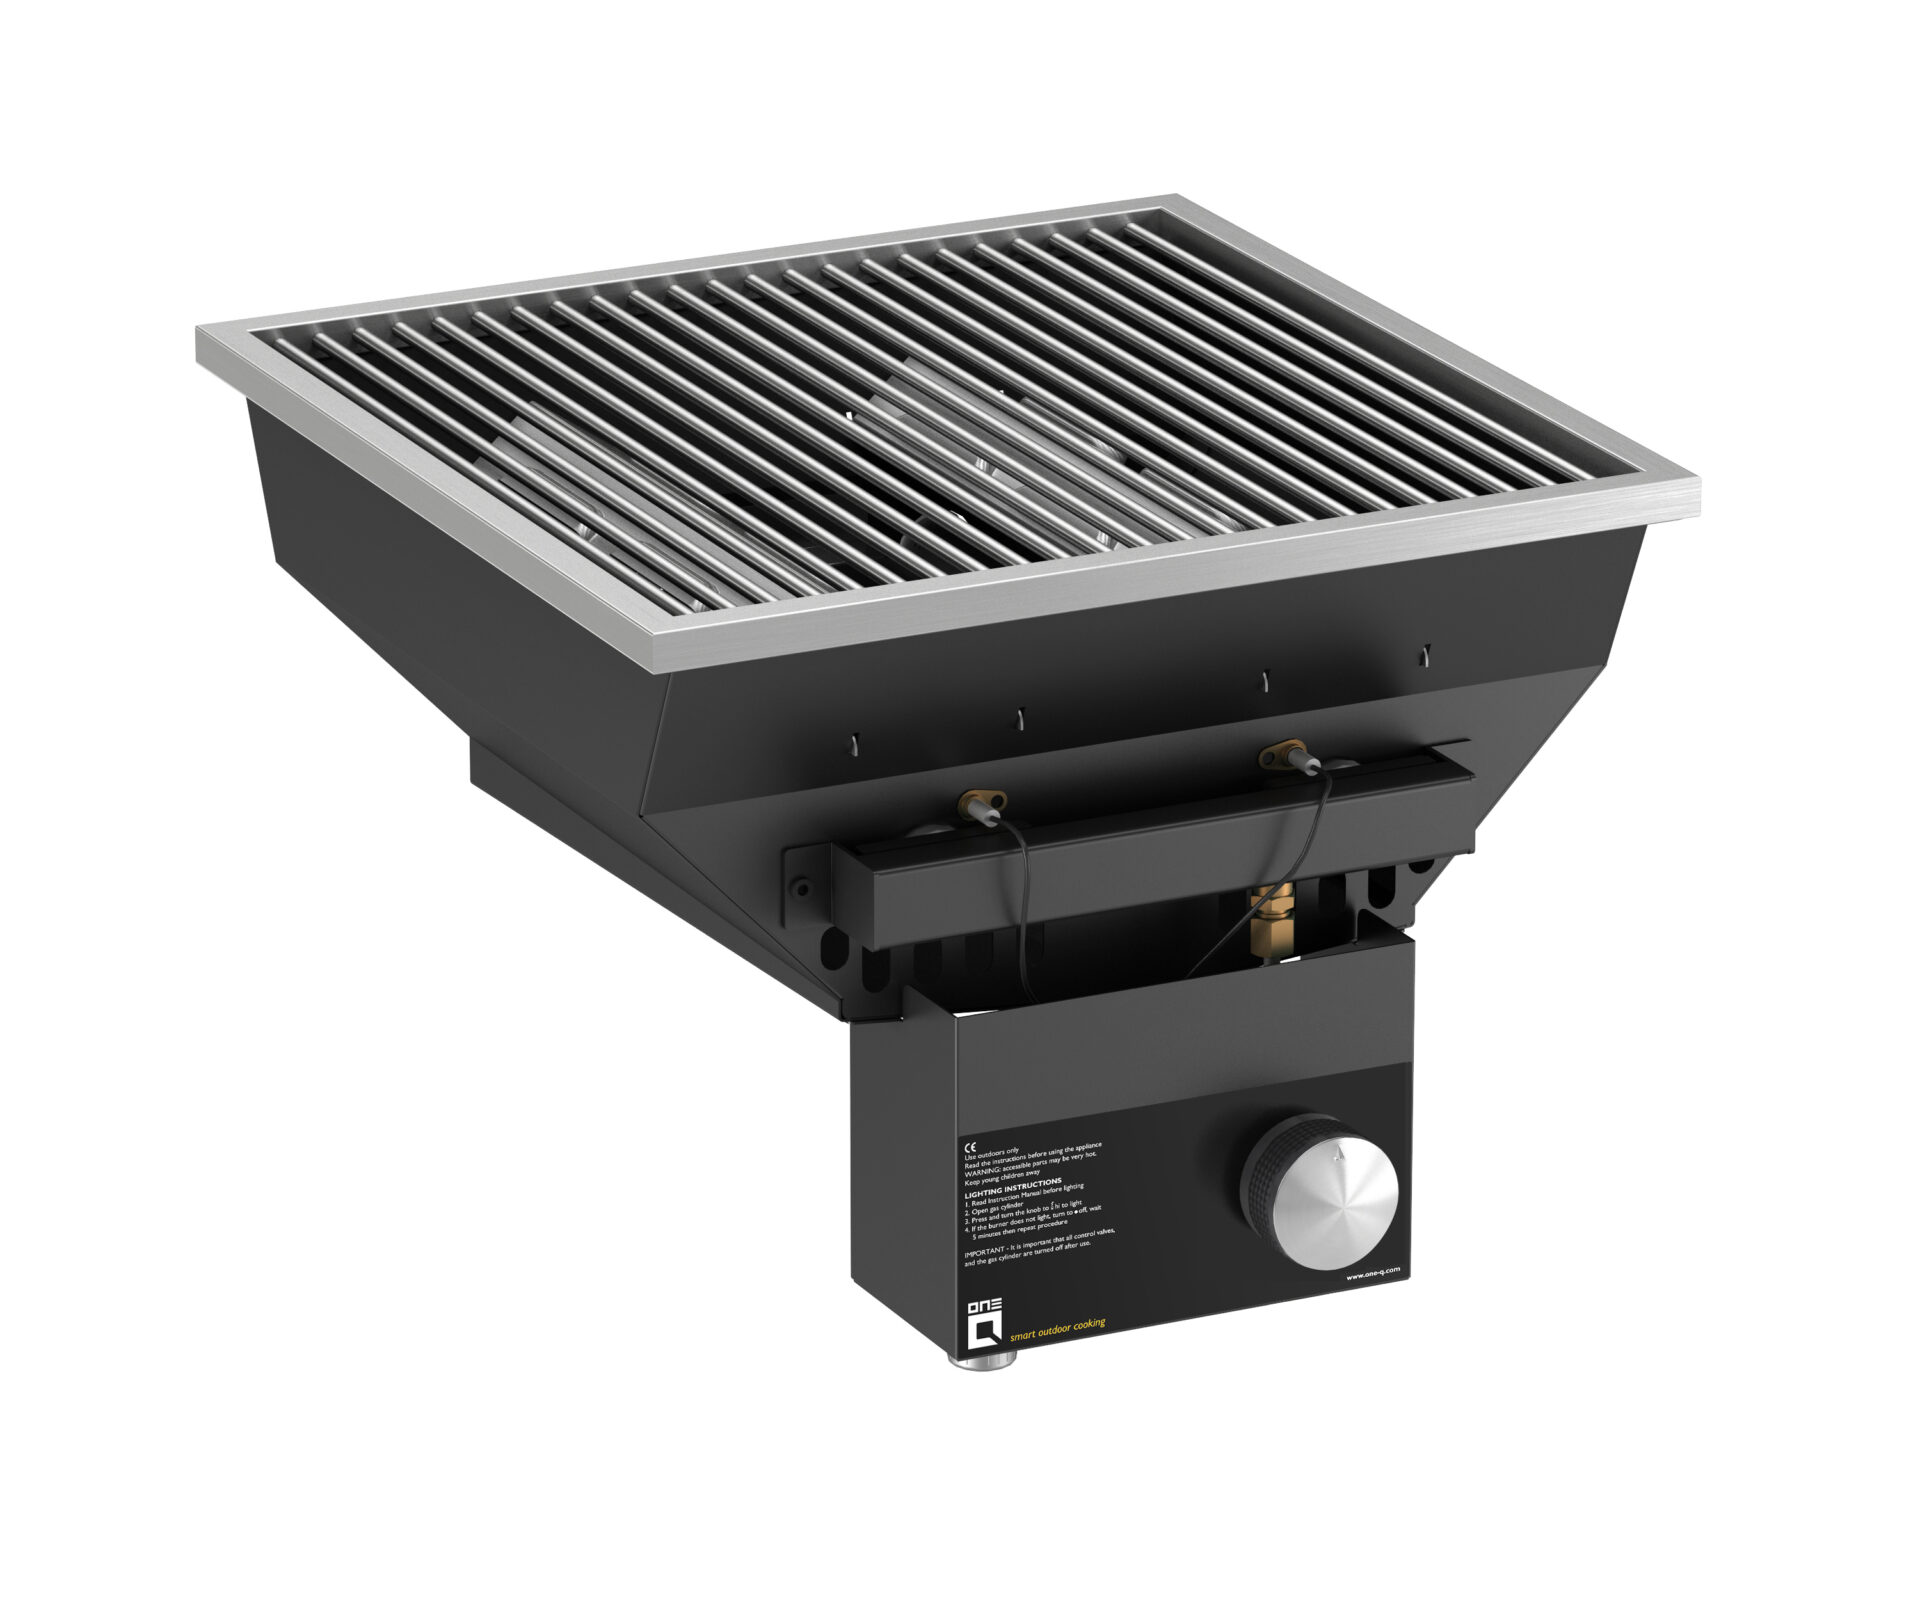 Barcelona grens George Stevenson Inbouw gas BBQ kopen? oneQ Flame Gas Barbecue - Forest Outdoor